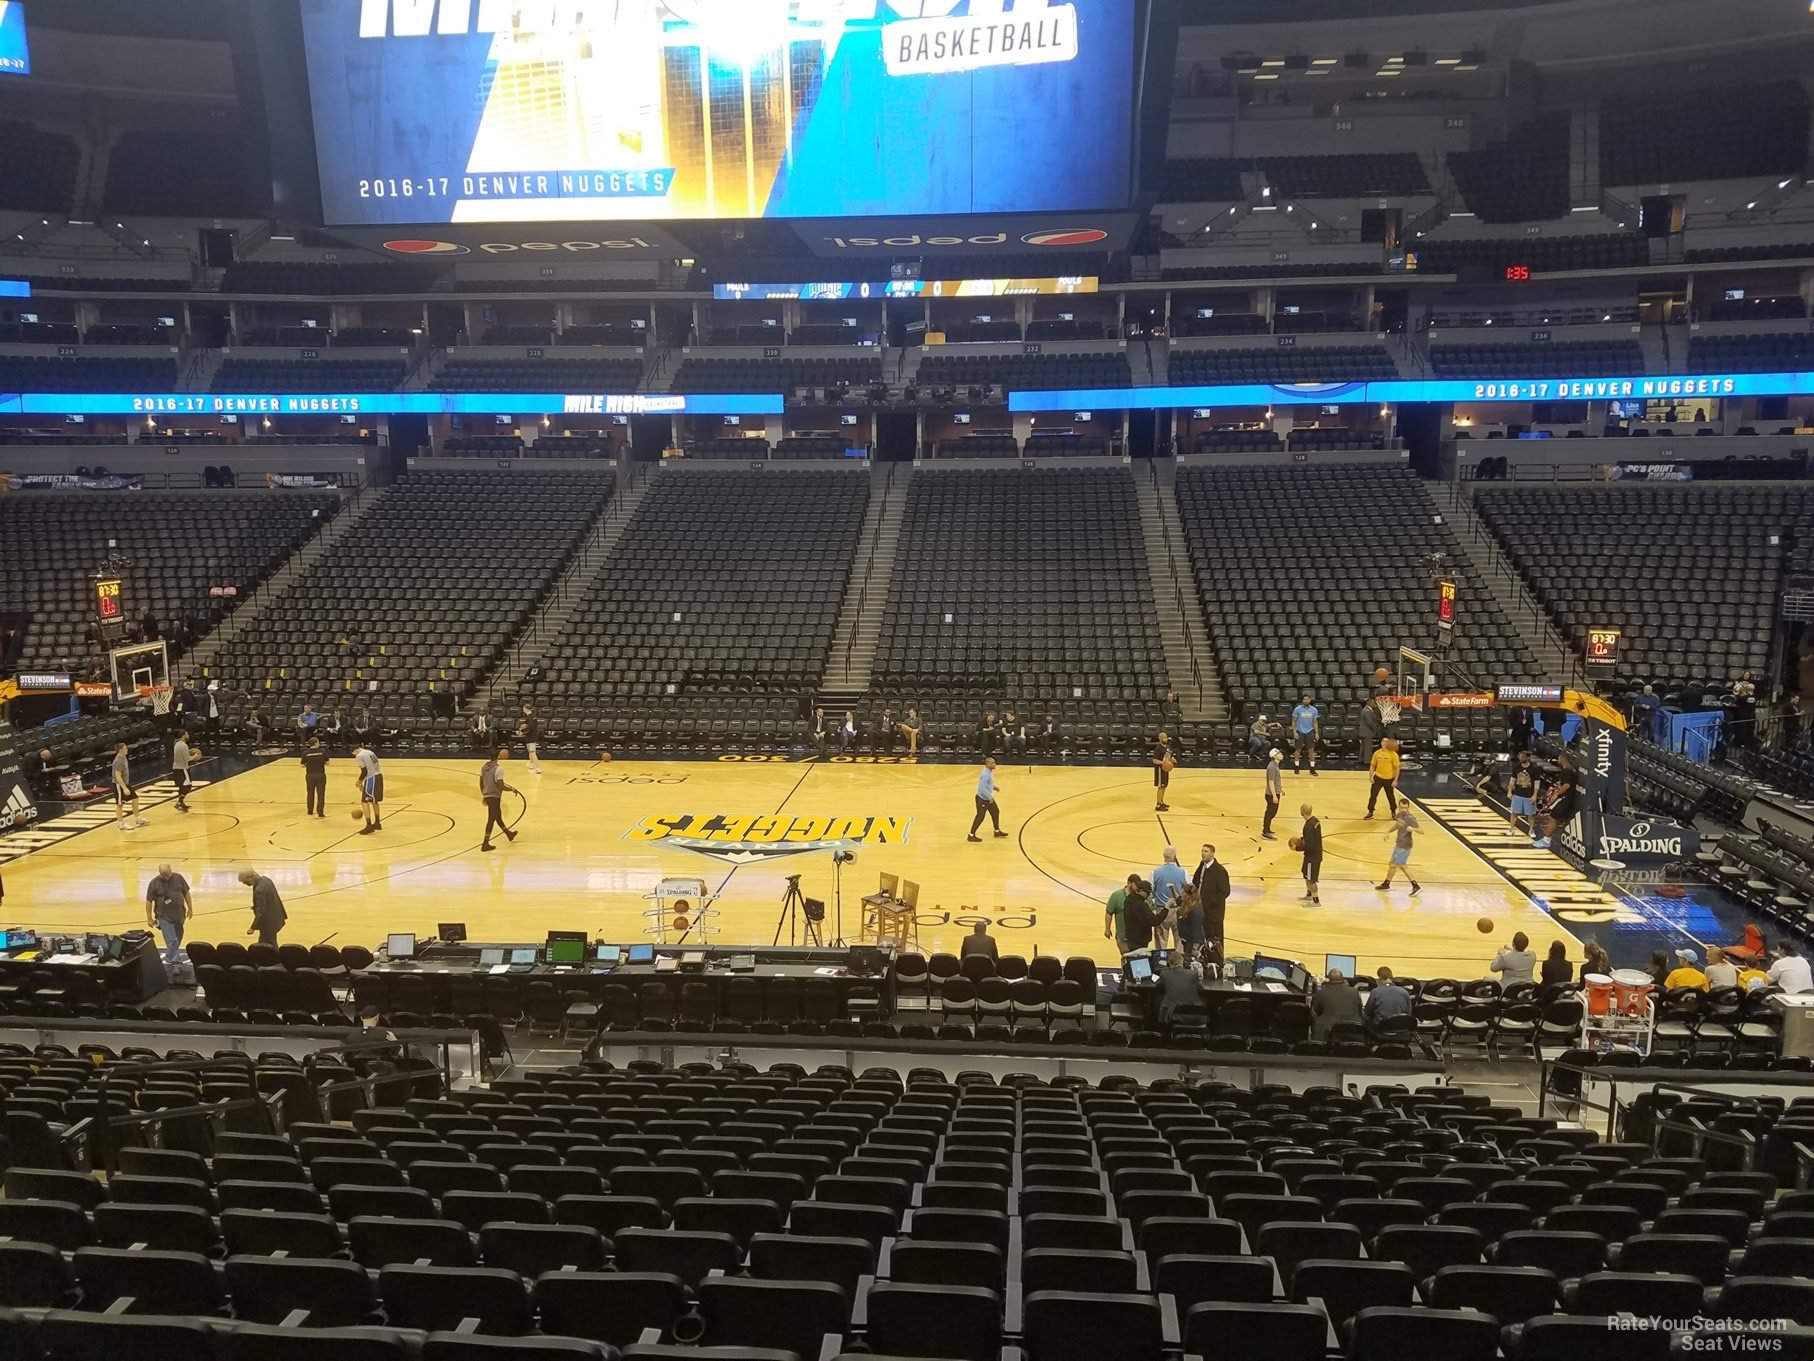 section 148, row 19 seat view  for basketball - ball arena